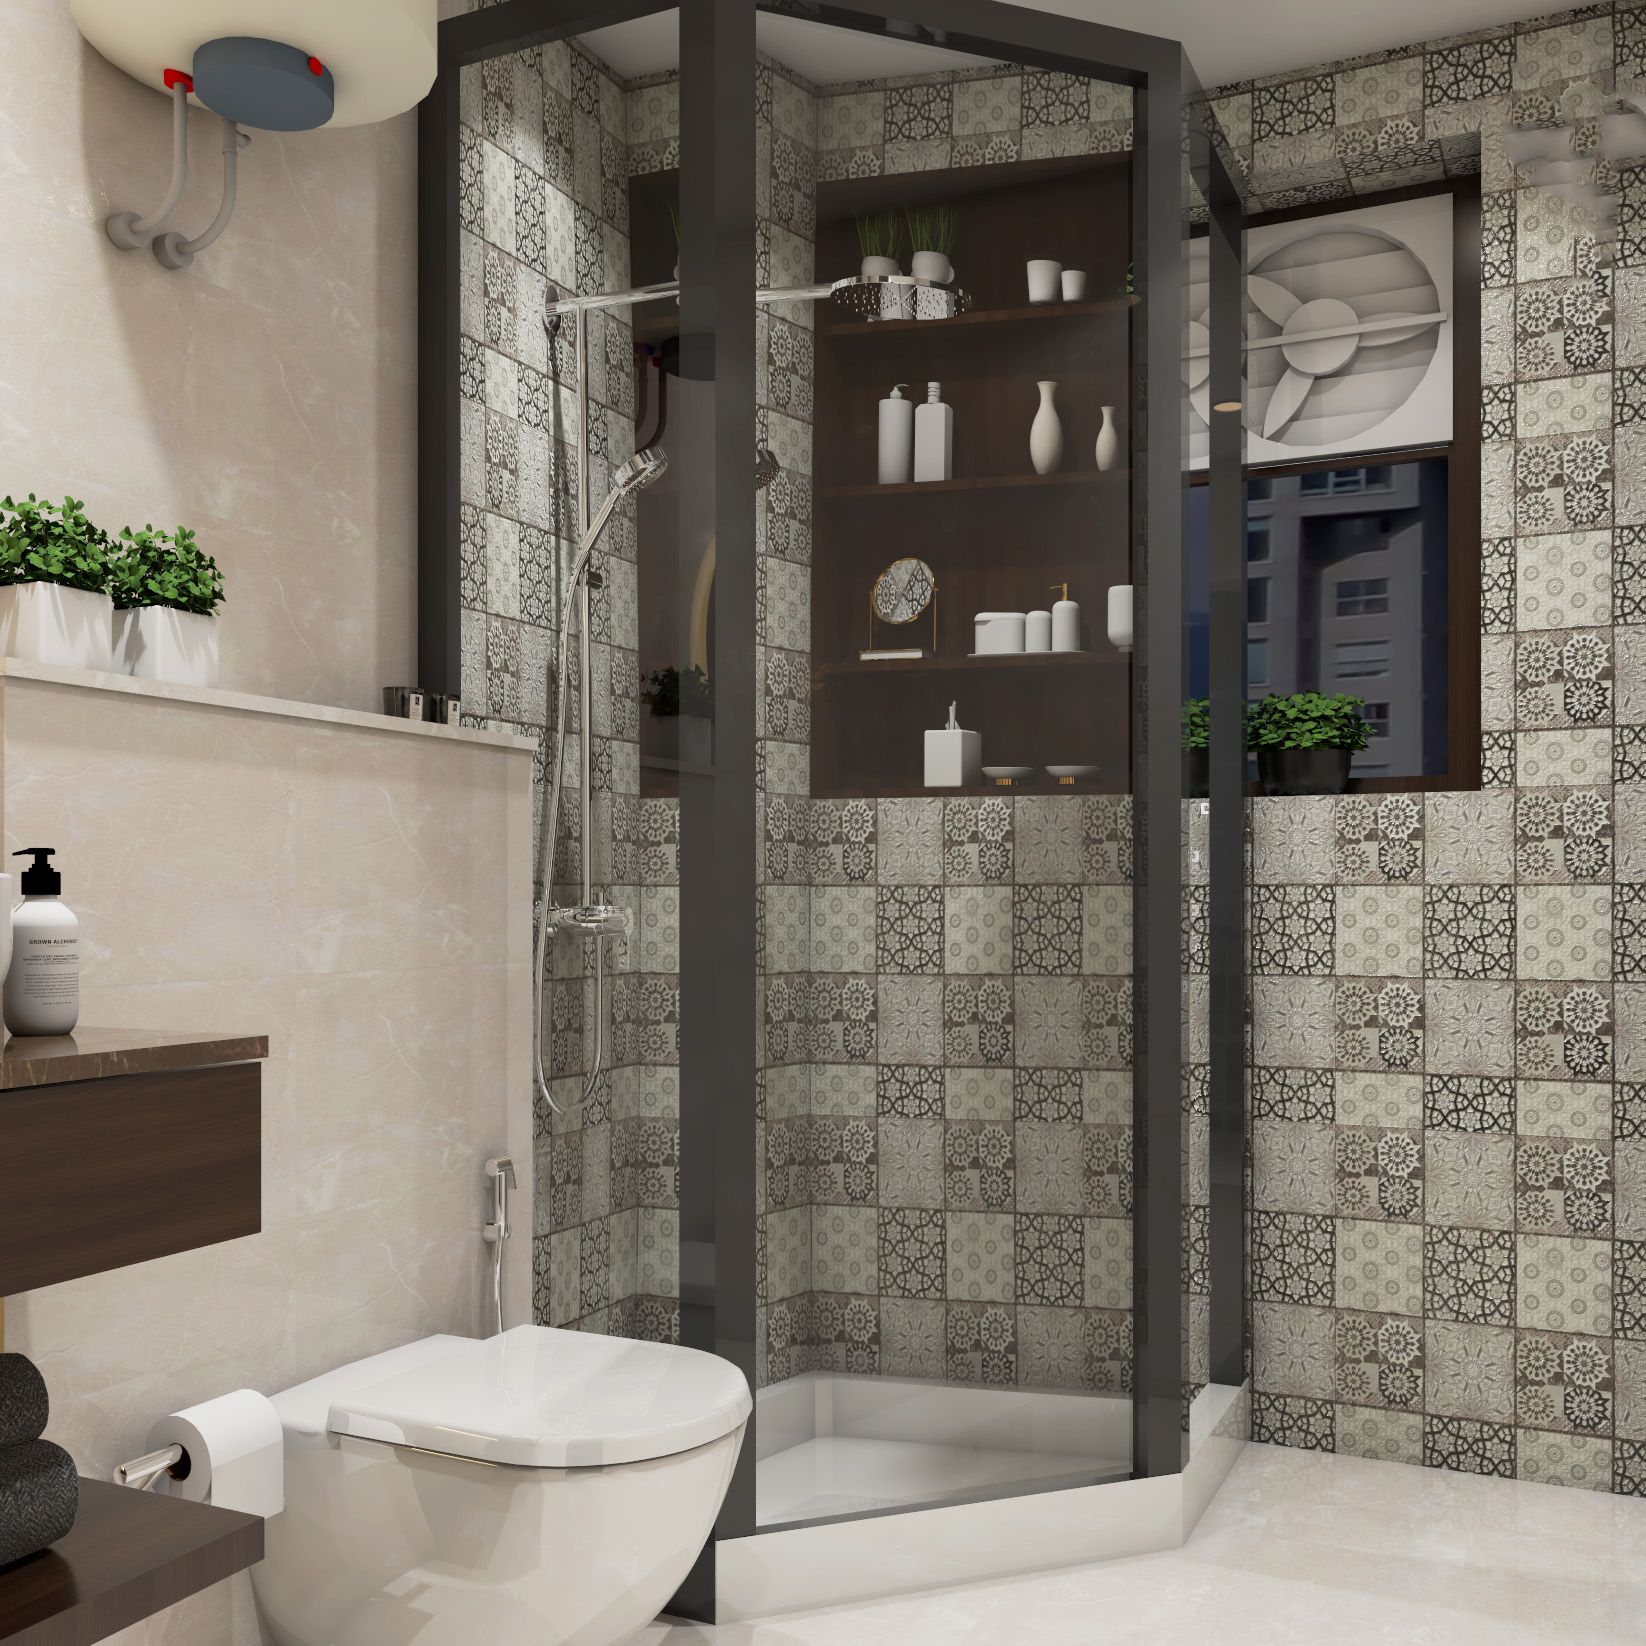 Ceramic Transitional Bathroom Tile Design With Beige Wall Tiles And Moroccan Pattern